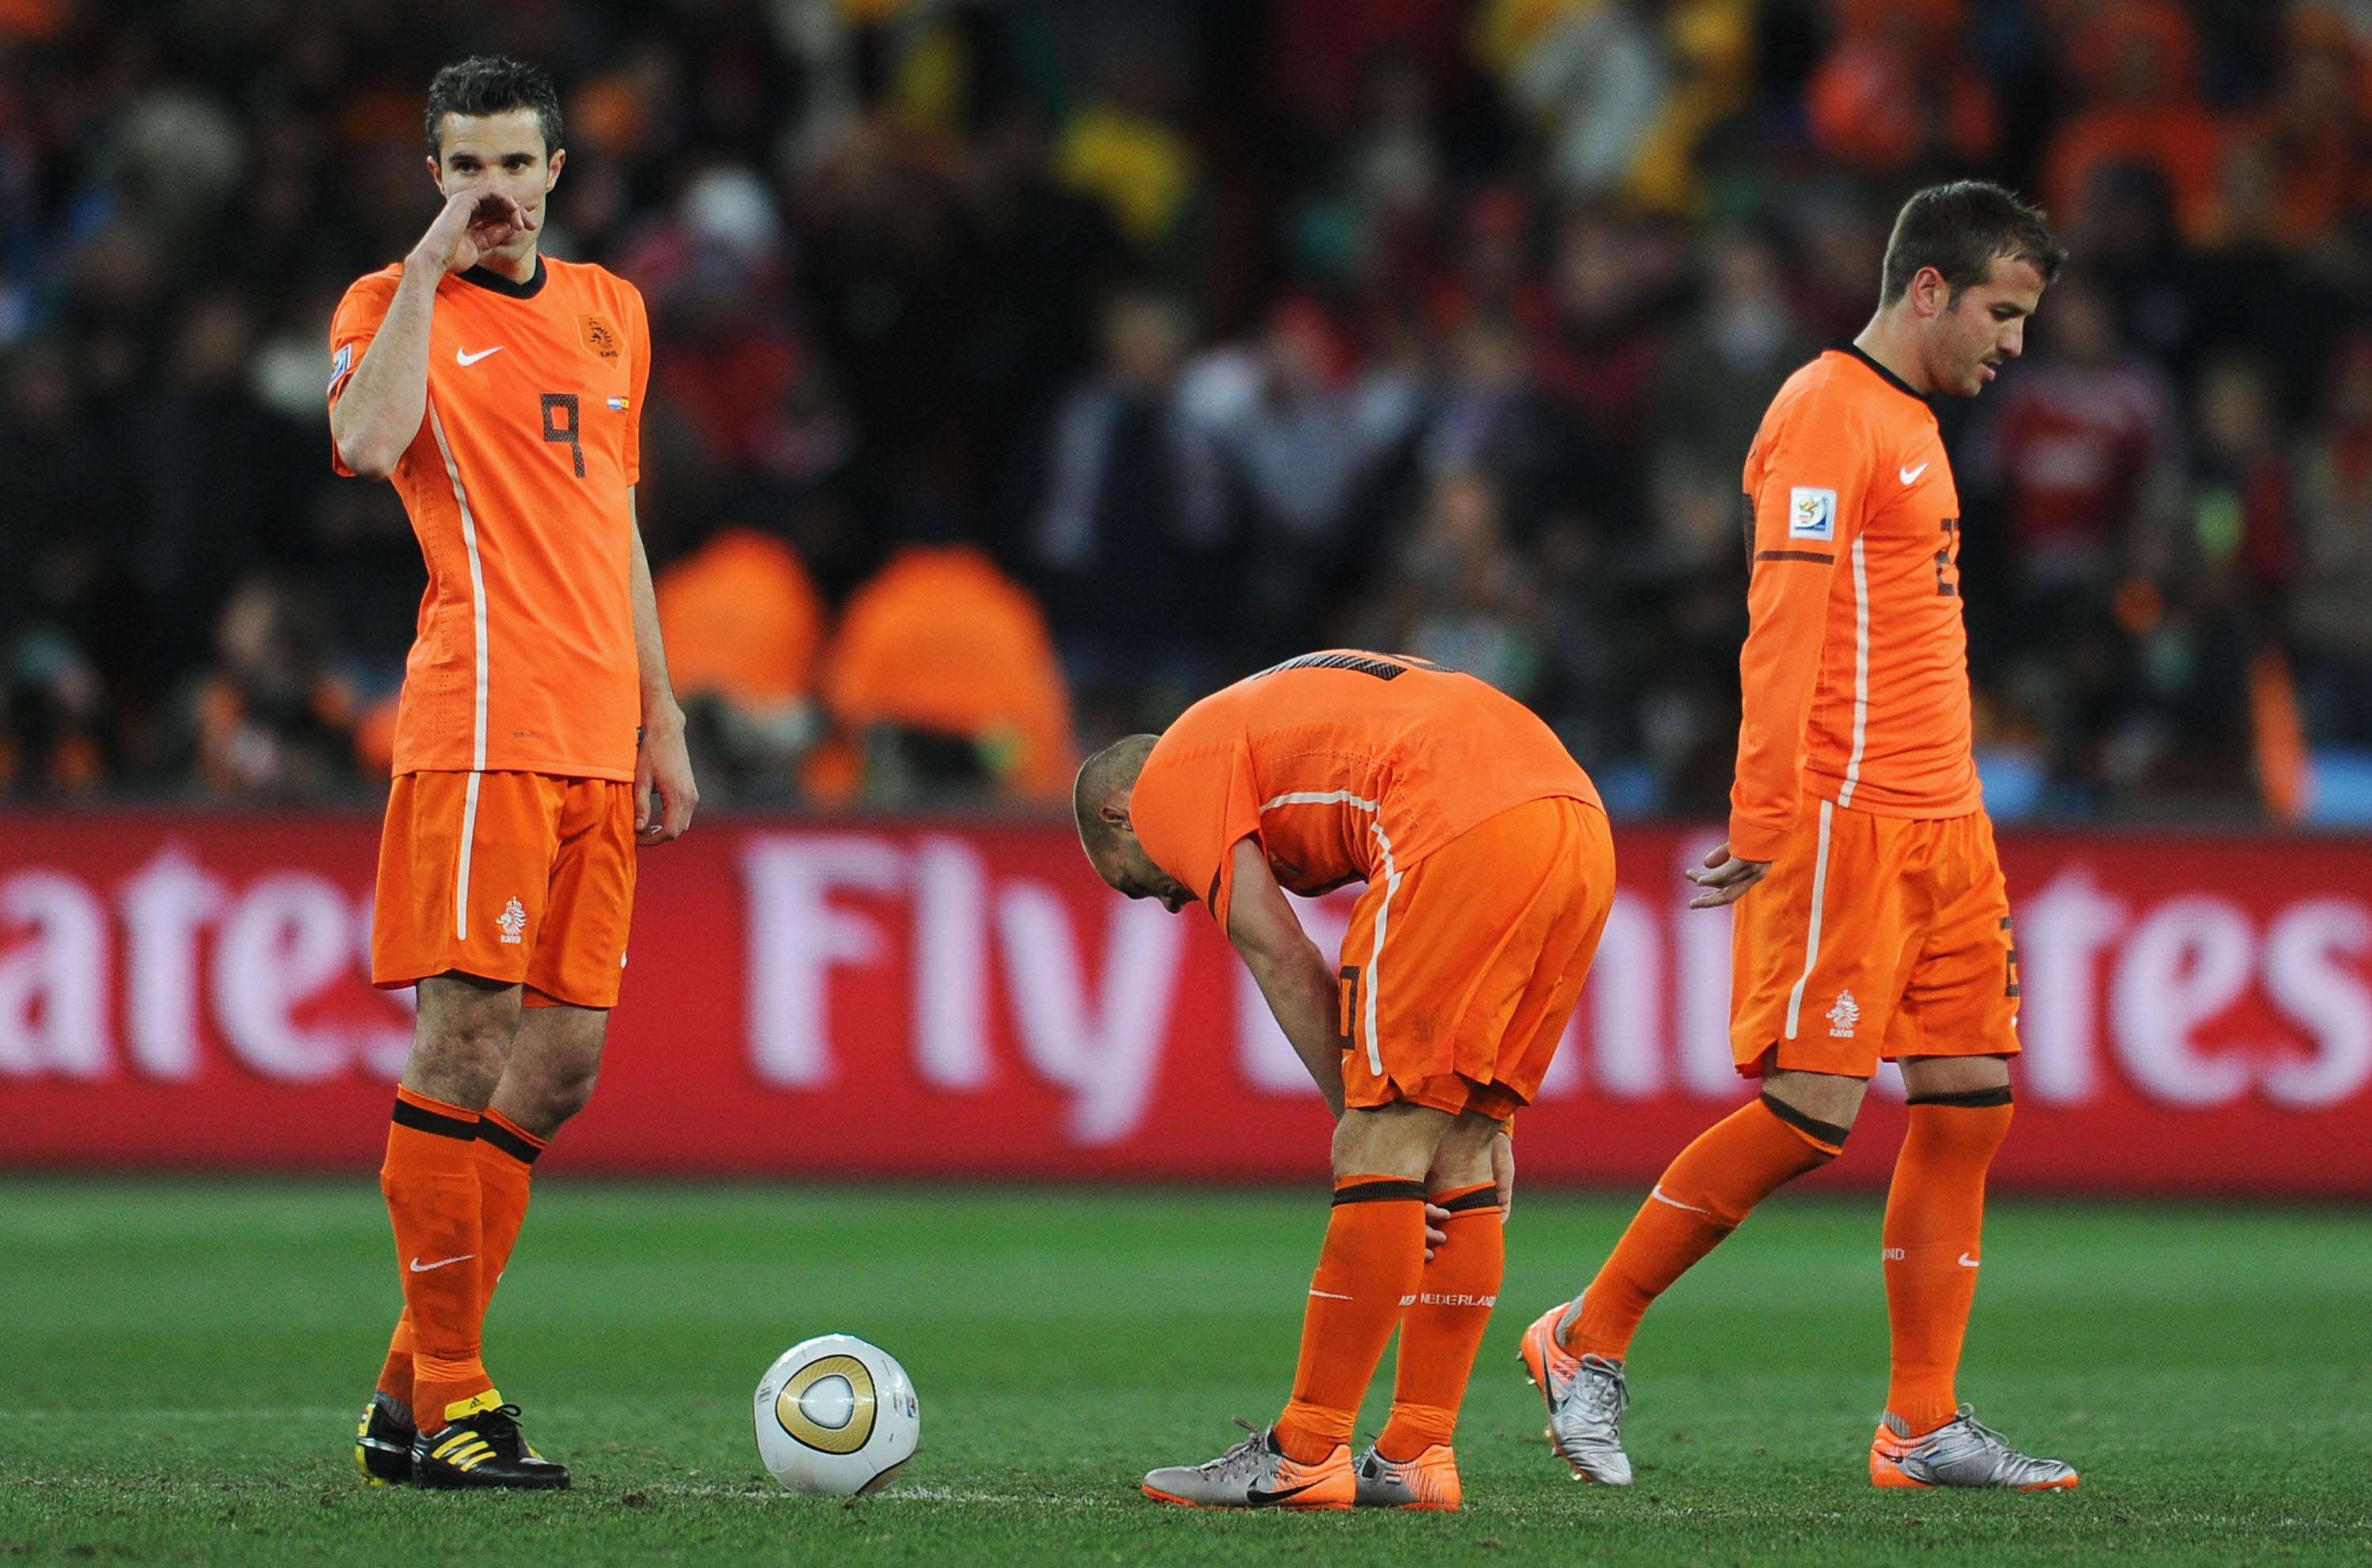 JOHANNESBURG, SOUTH AFRICA - JULY 11: Robin Van Persie, Wesley Sneijder and Rafael Van der Vaart of the Netherlands prepare to restart the match following a late Spain goal during the 2010 FIFA World Cup South Africa Final match between Netherlands and Sp